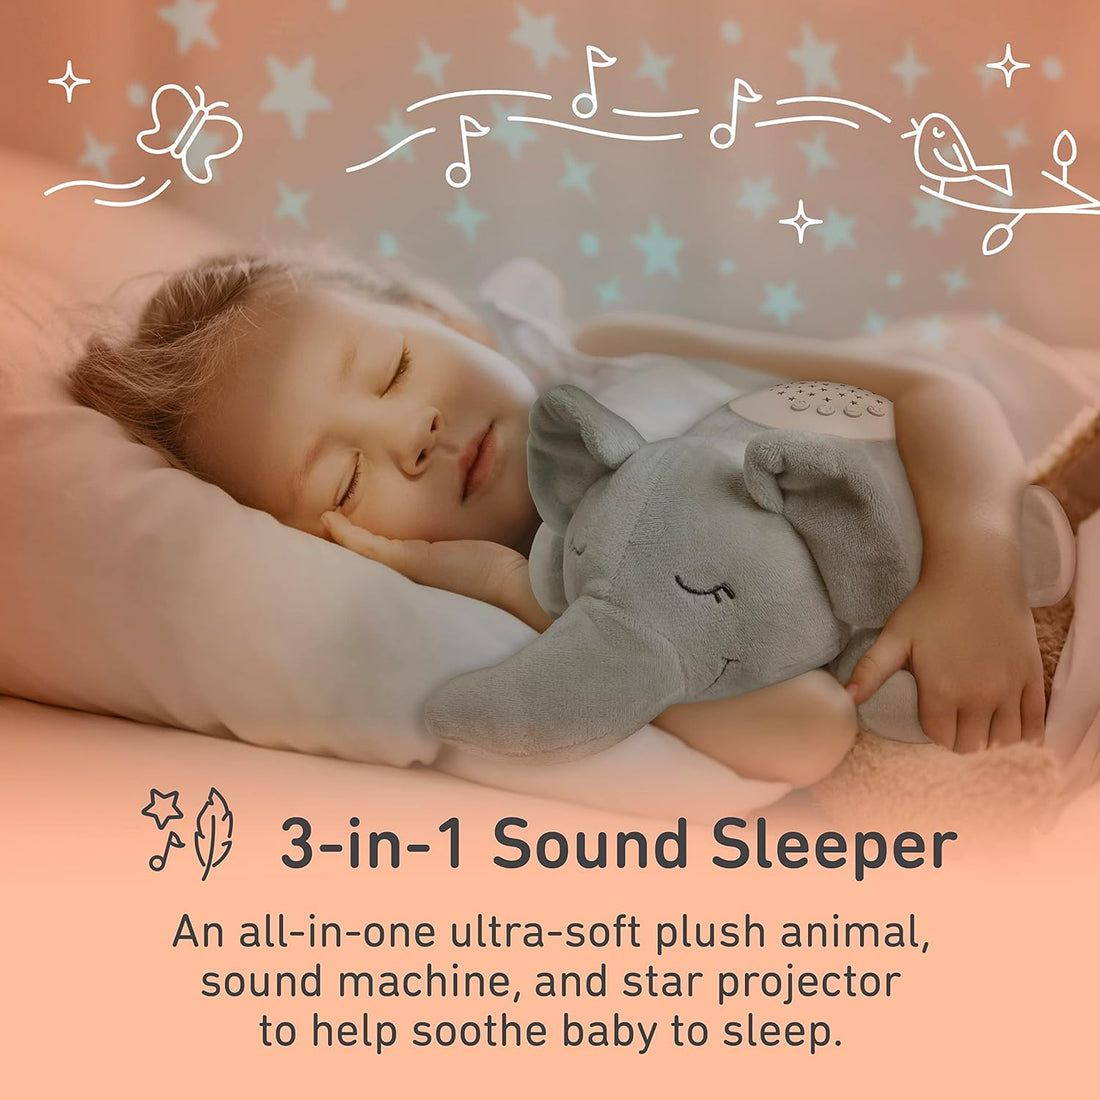 PureBaby Sound Sleepers Portable Sound Machine & Star Projector - Plush Sleep Aid for Baby and Toddlers with Soothing Night Light Display, 10 Lullabies, White Noise, and Heartbeat Sounds (Elephant)